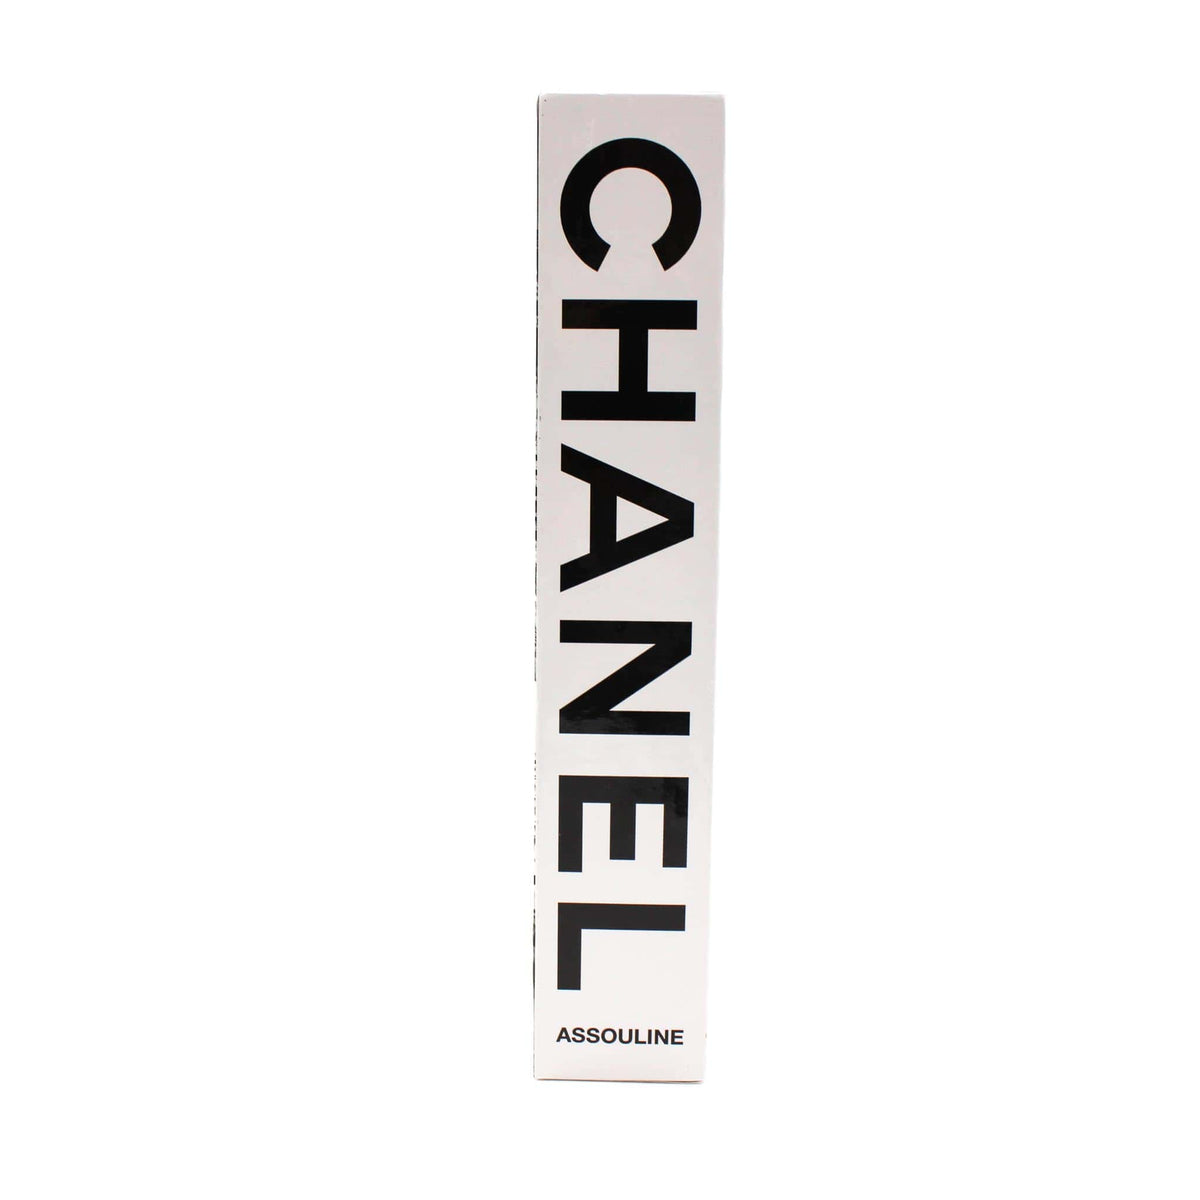 Chanel Trilogy Book Collection